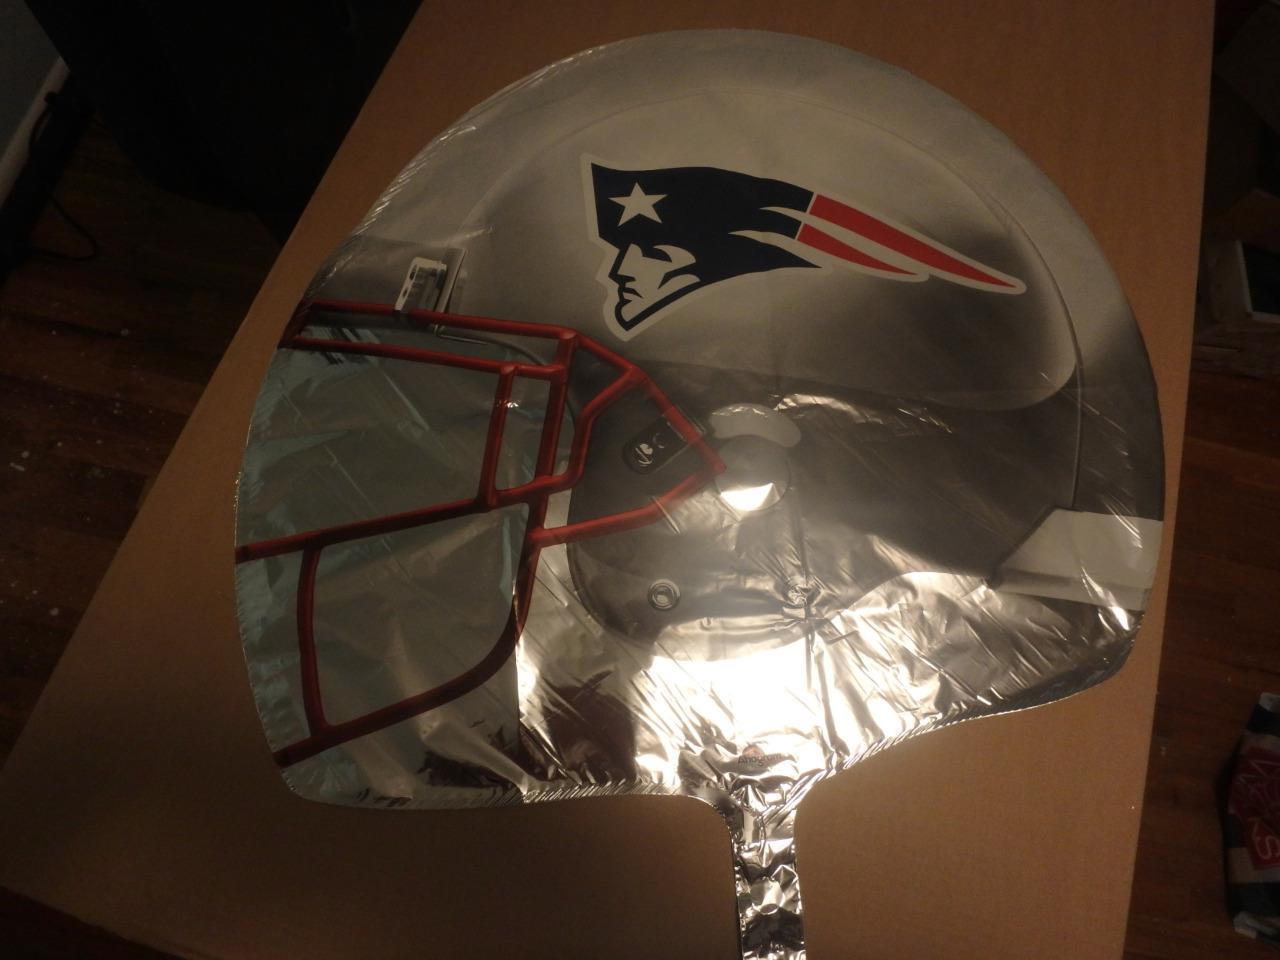 Primary image for 2017 SUPER BOWL BALLOON AFC HELMET BY ANAGRAM NEW ENGLAND PATRIOTS